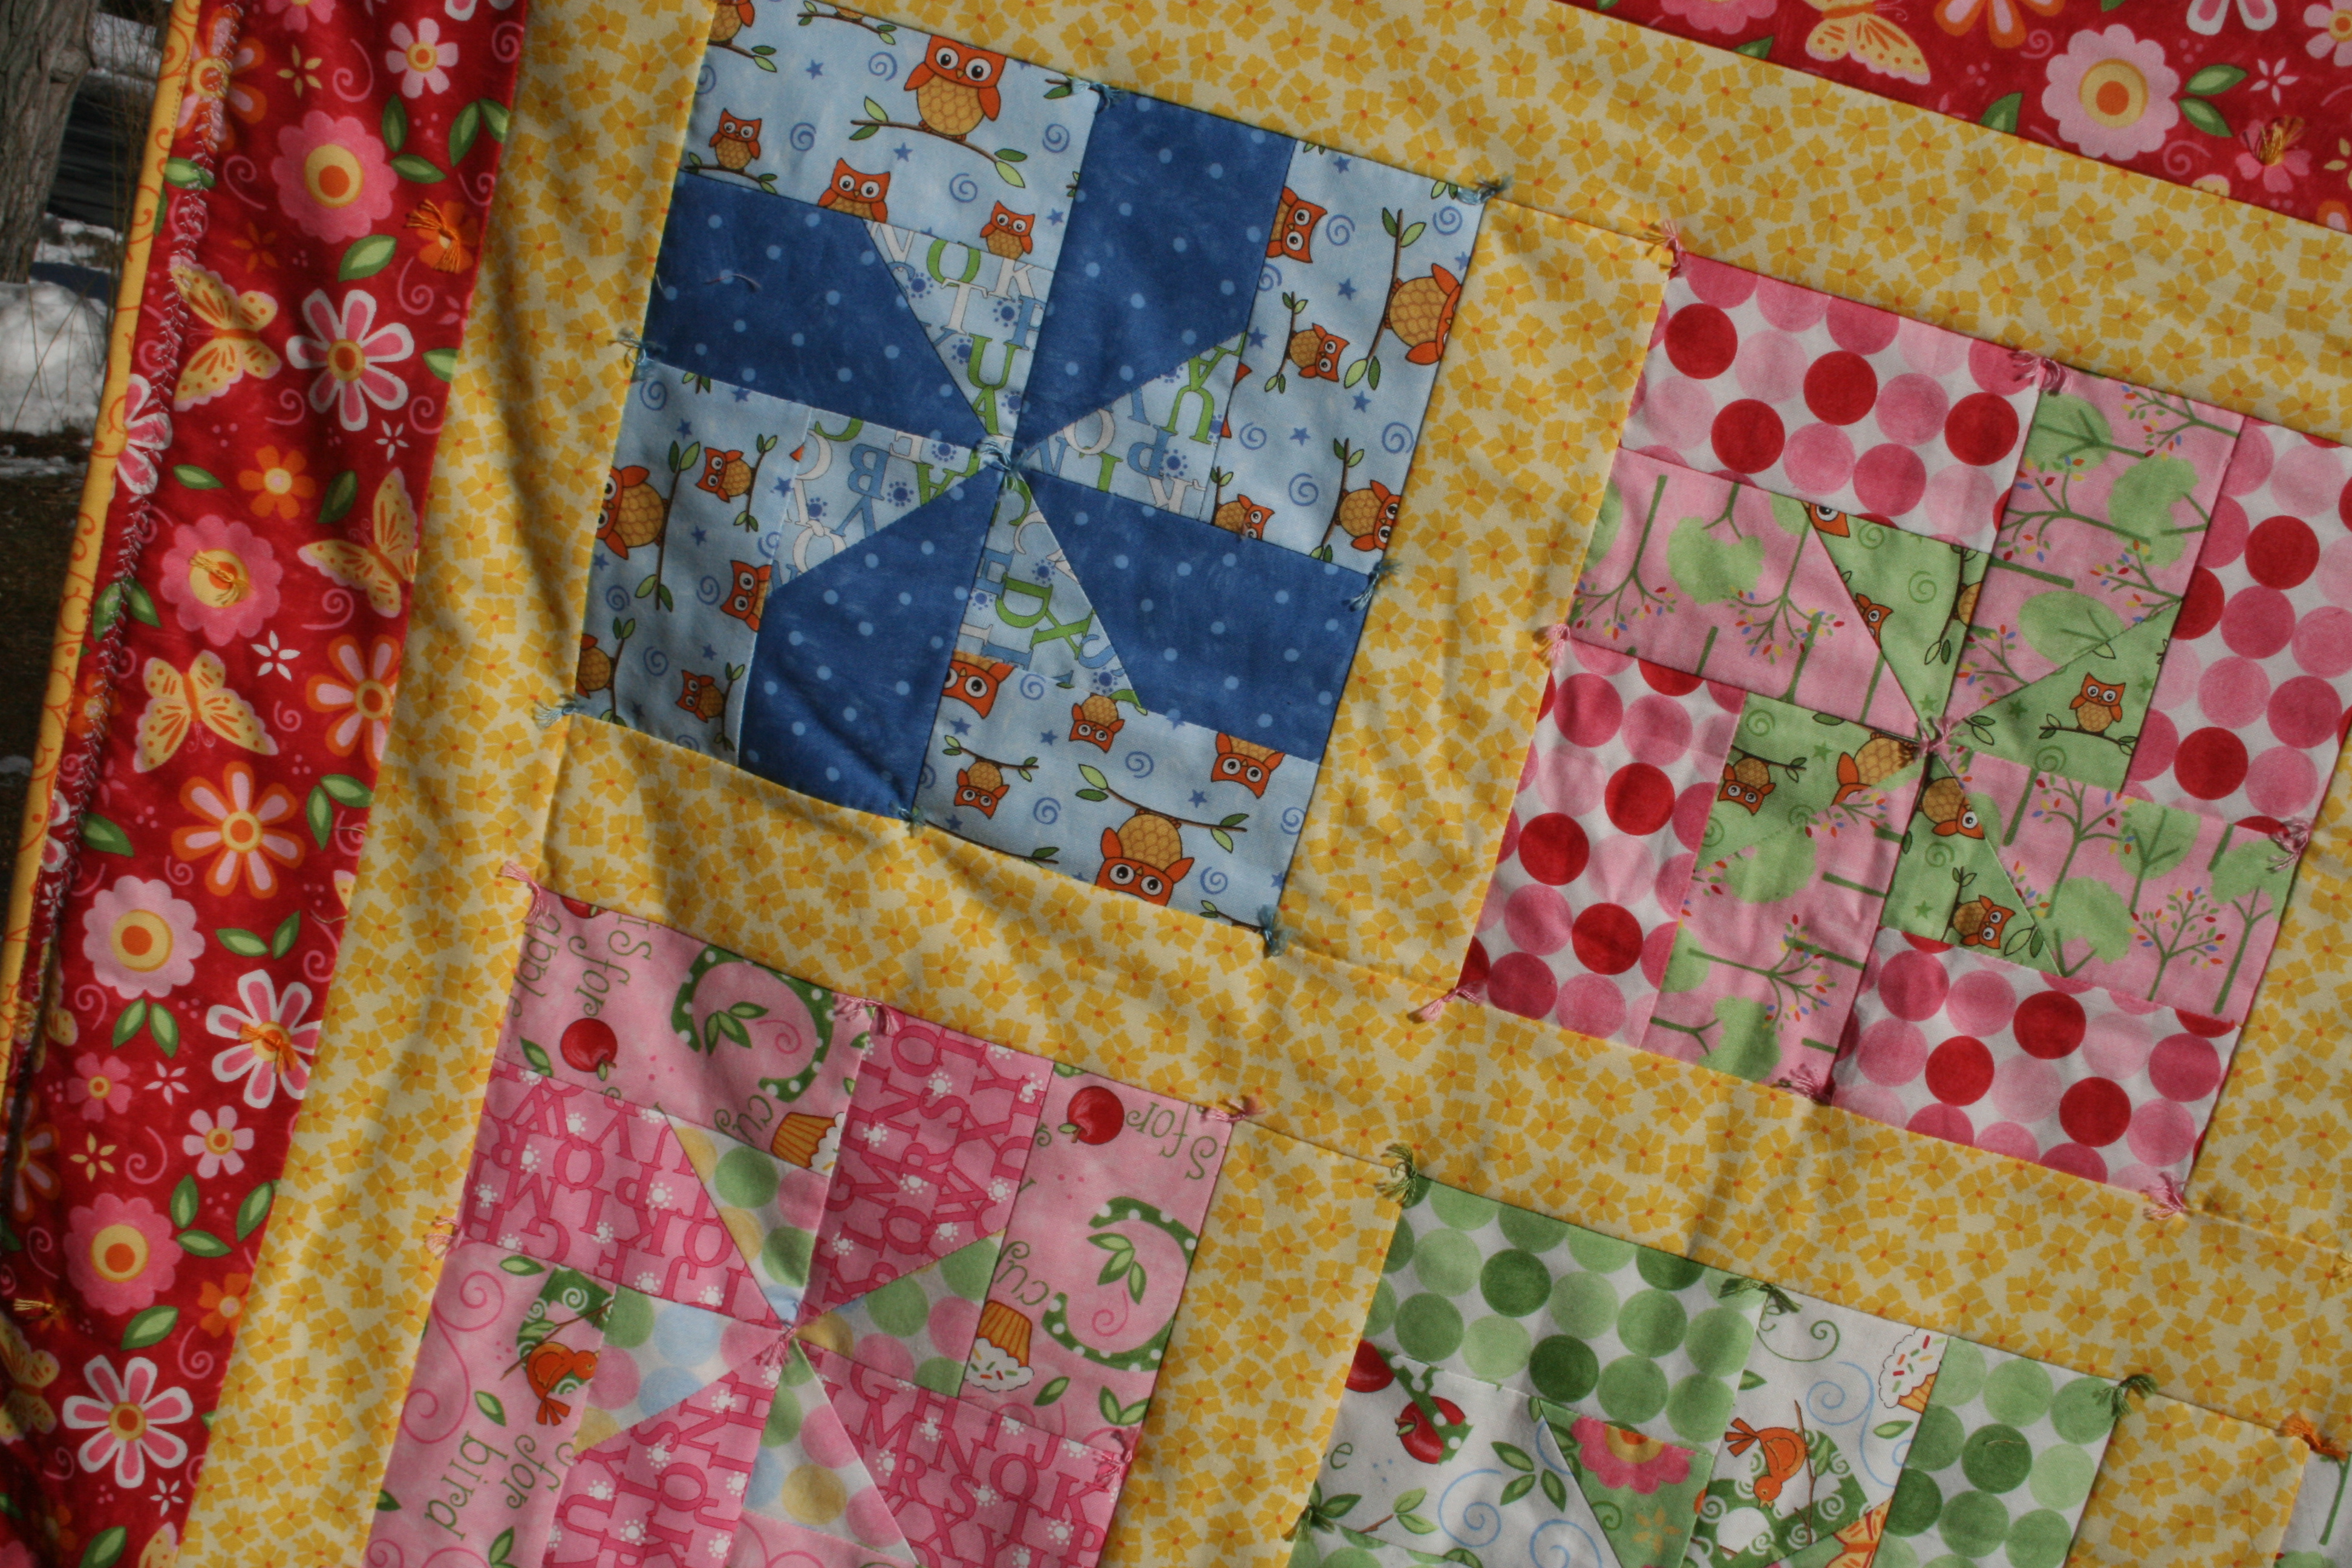 jelly-roll-baby-quilt-the-nerdly-home-jelly-roll-baby-quilt-better-living-through-geekiness